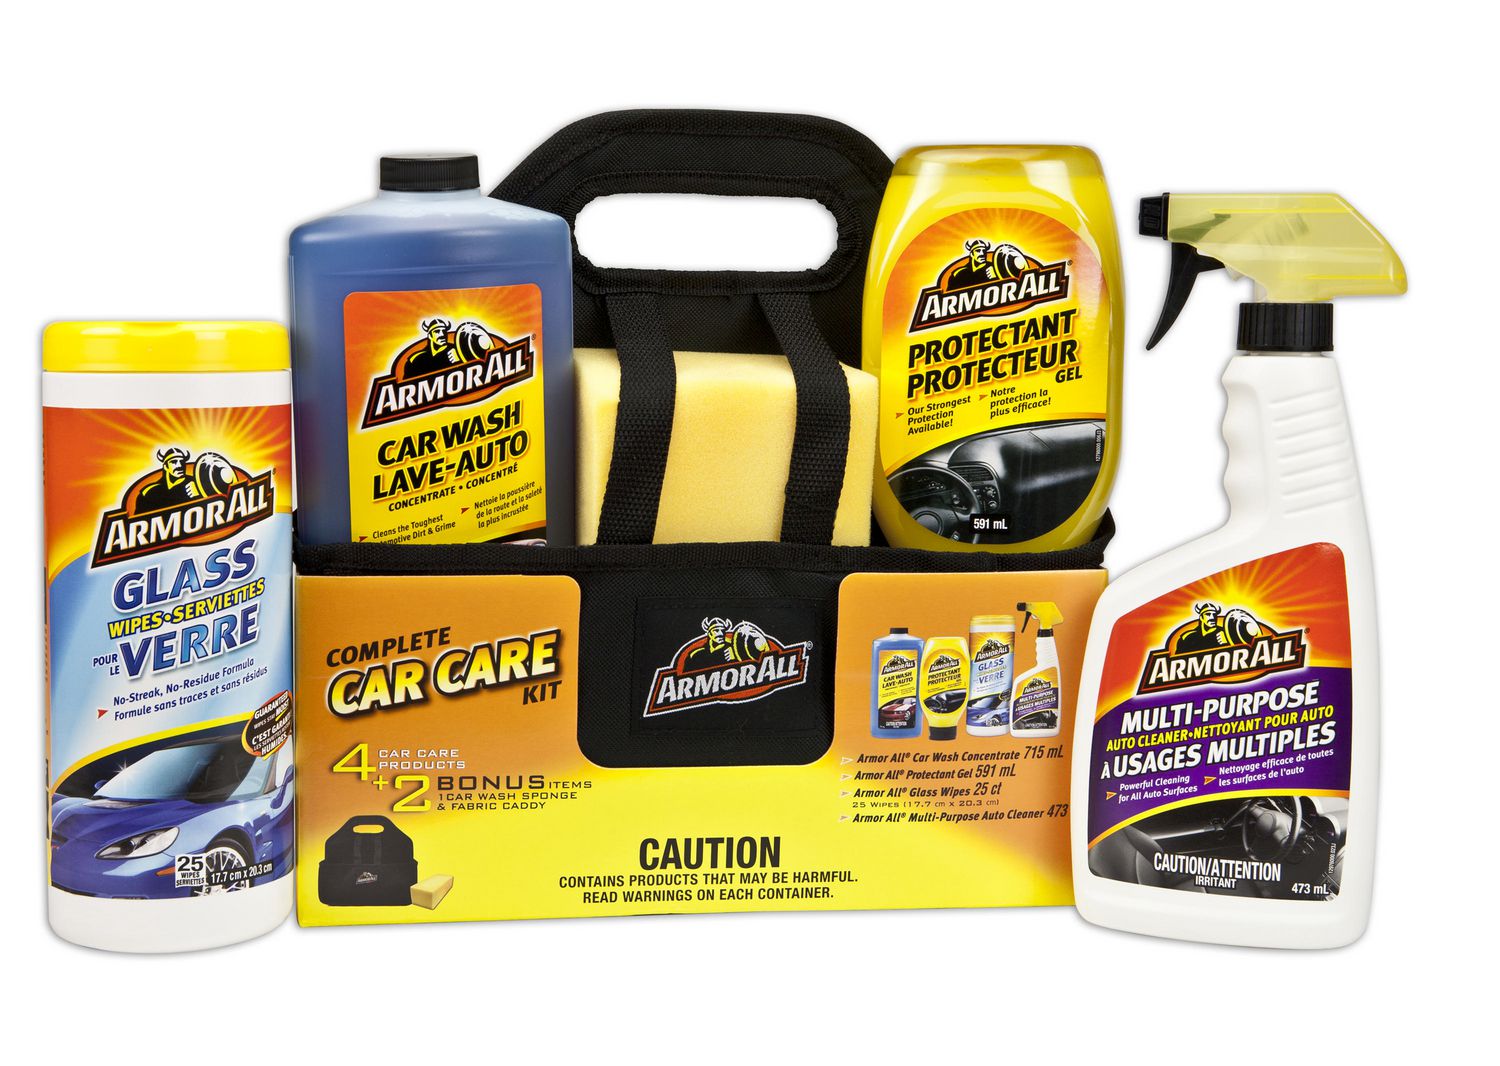 Armor All Complete Car Care Kit (9 Items) - Car Wash, Detailing and  Cleaning Kit - Cleans Vinyl, Dashboard, Windows, Leather - Unscented -  Count in the Car Interior Cleaners department at